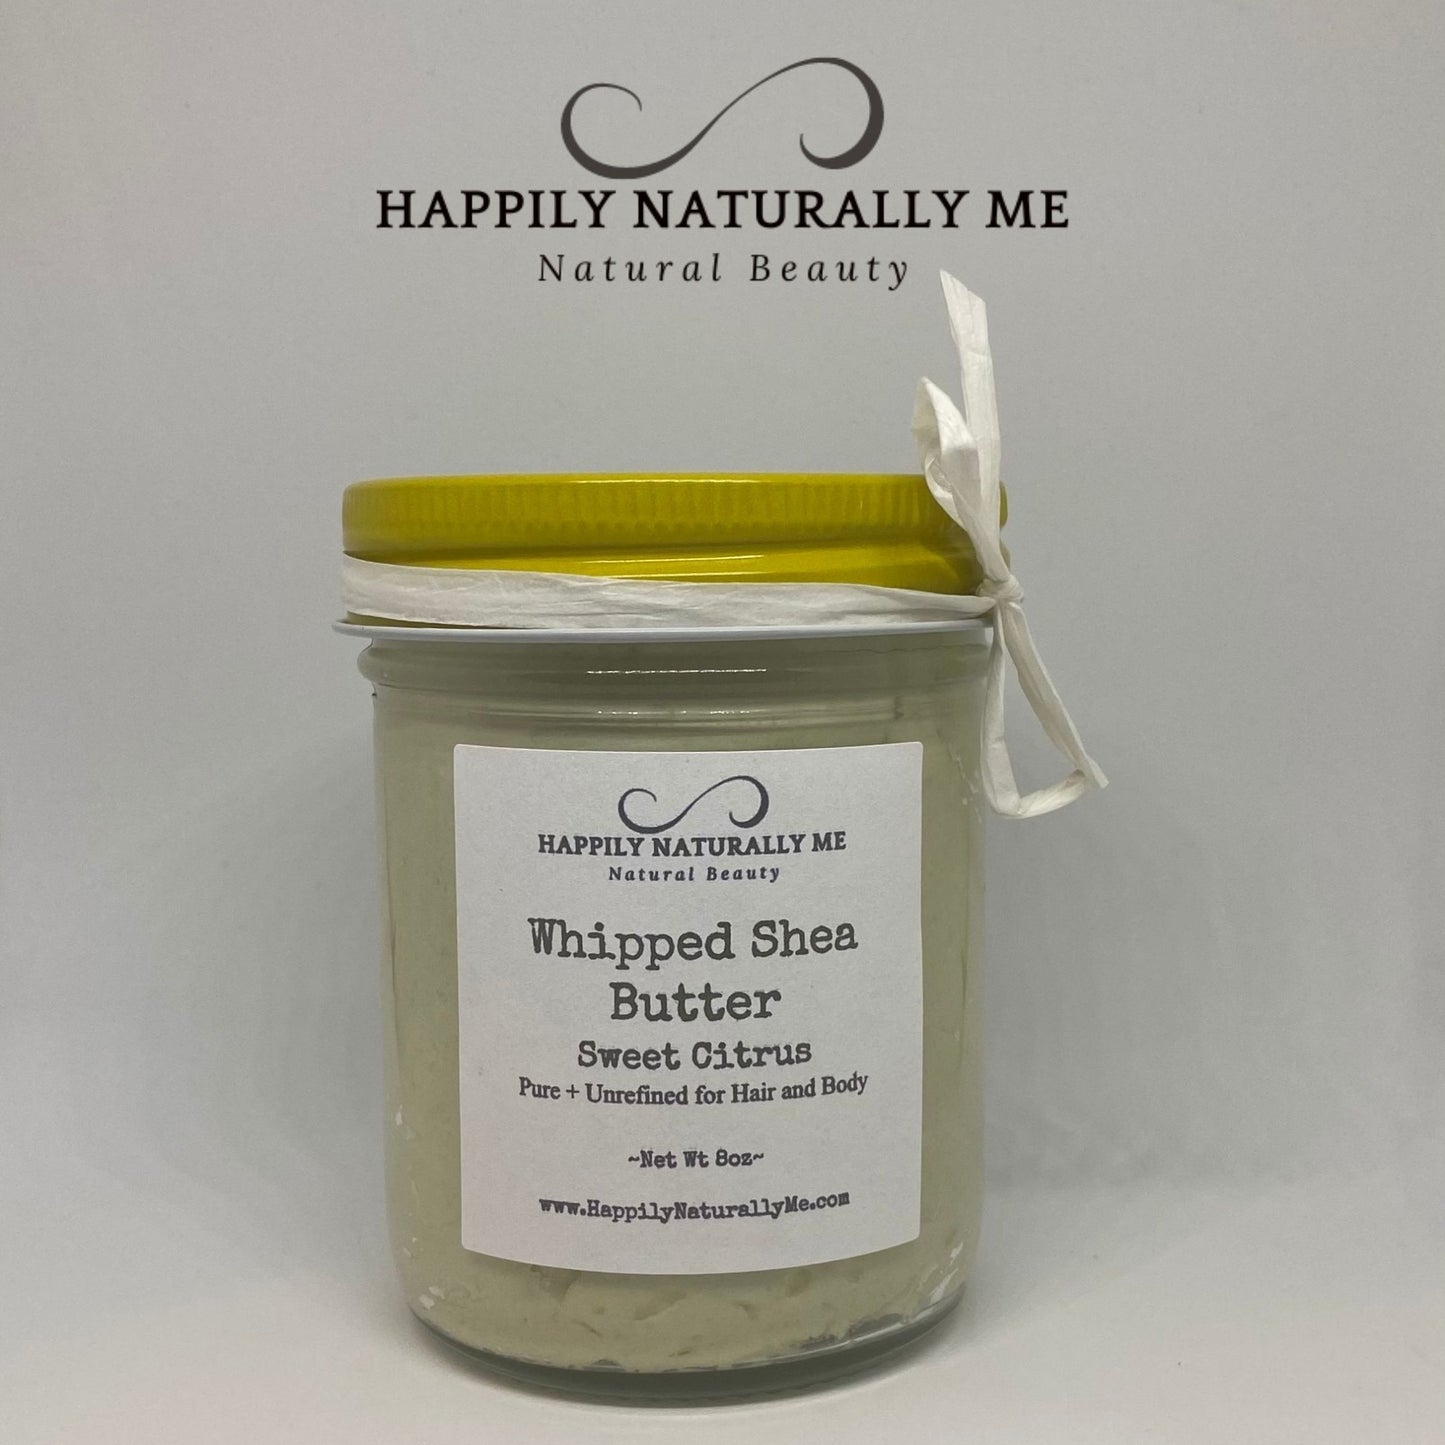 Whipped Shea Butter-Sweet Citrus